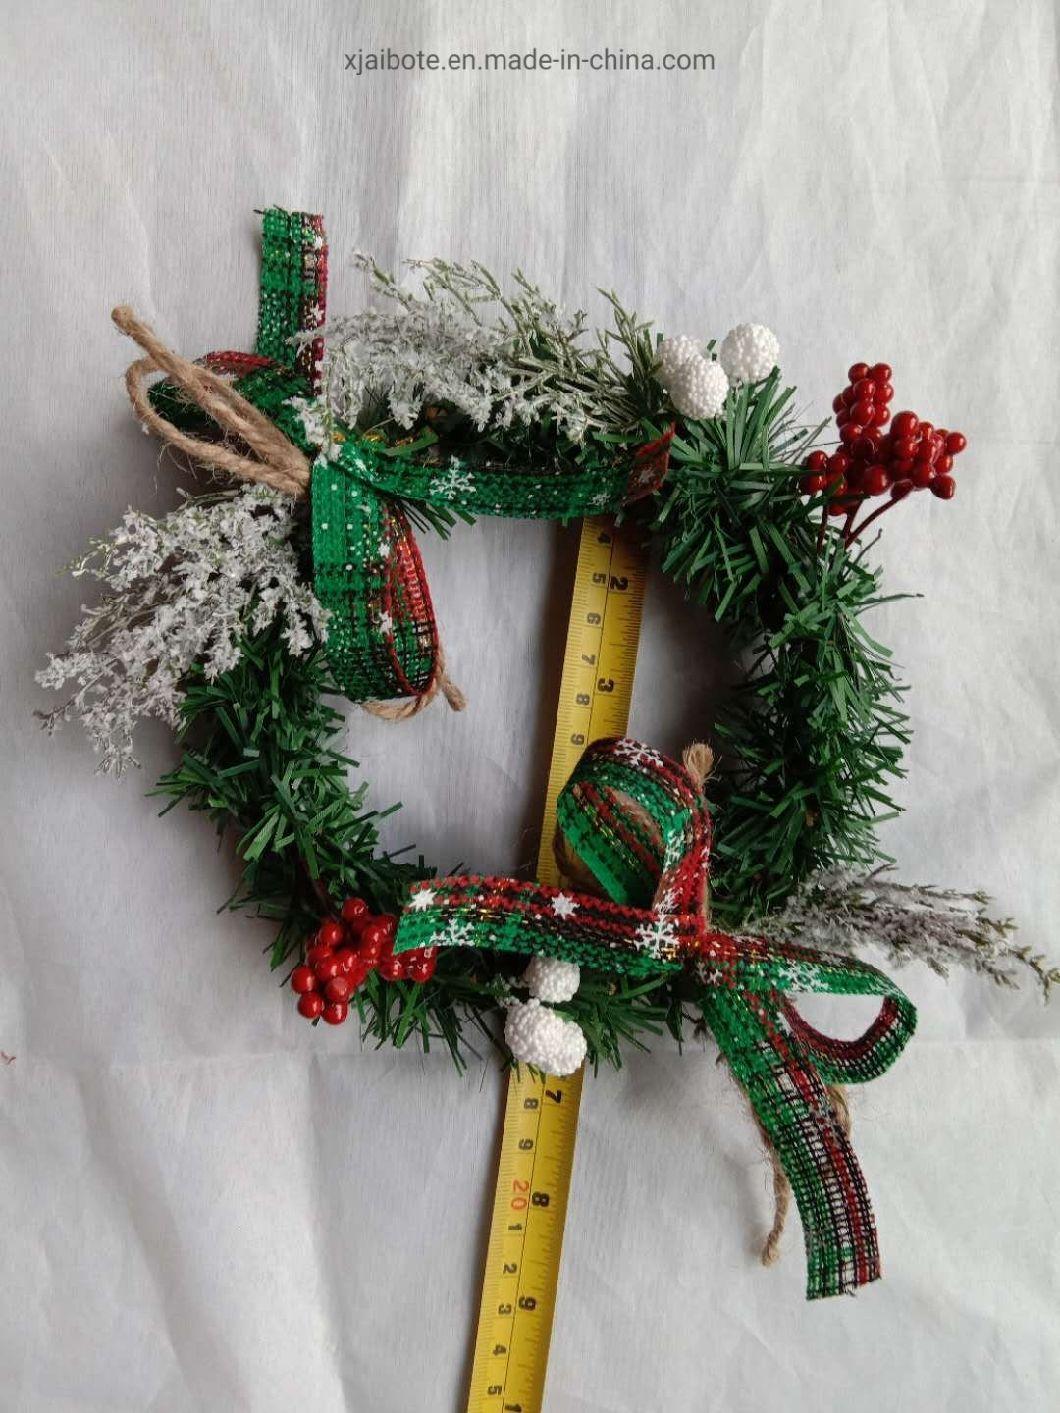 Christmas Wreath Artificial Flower Christmas Ornaments Pendant Garland Christmas Decorations for Home Navidad 2020 New Year Gift